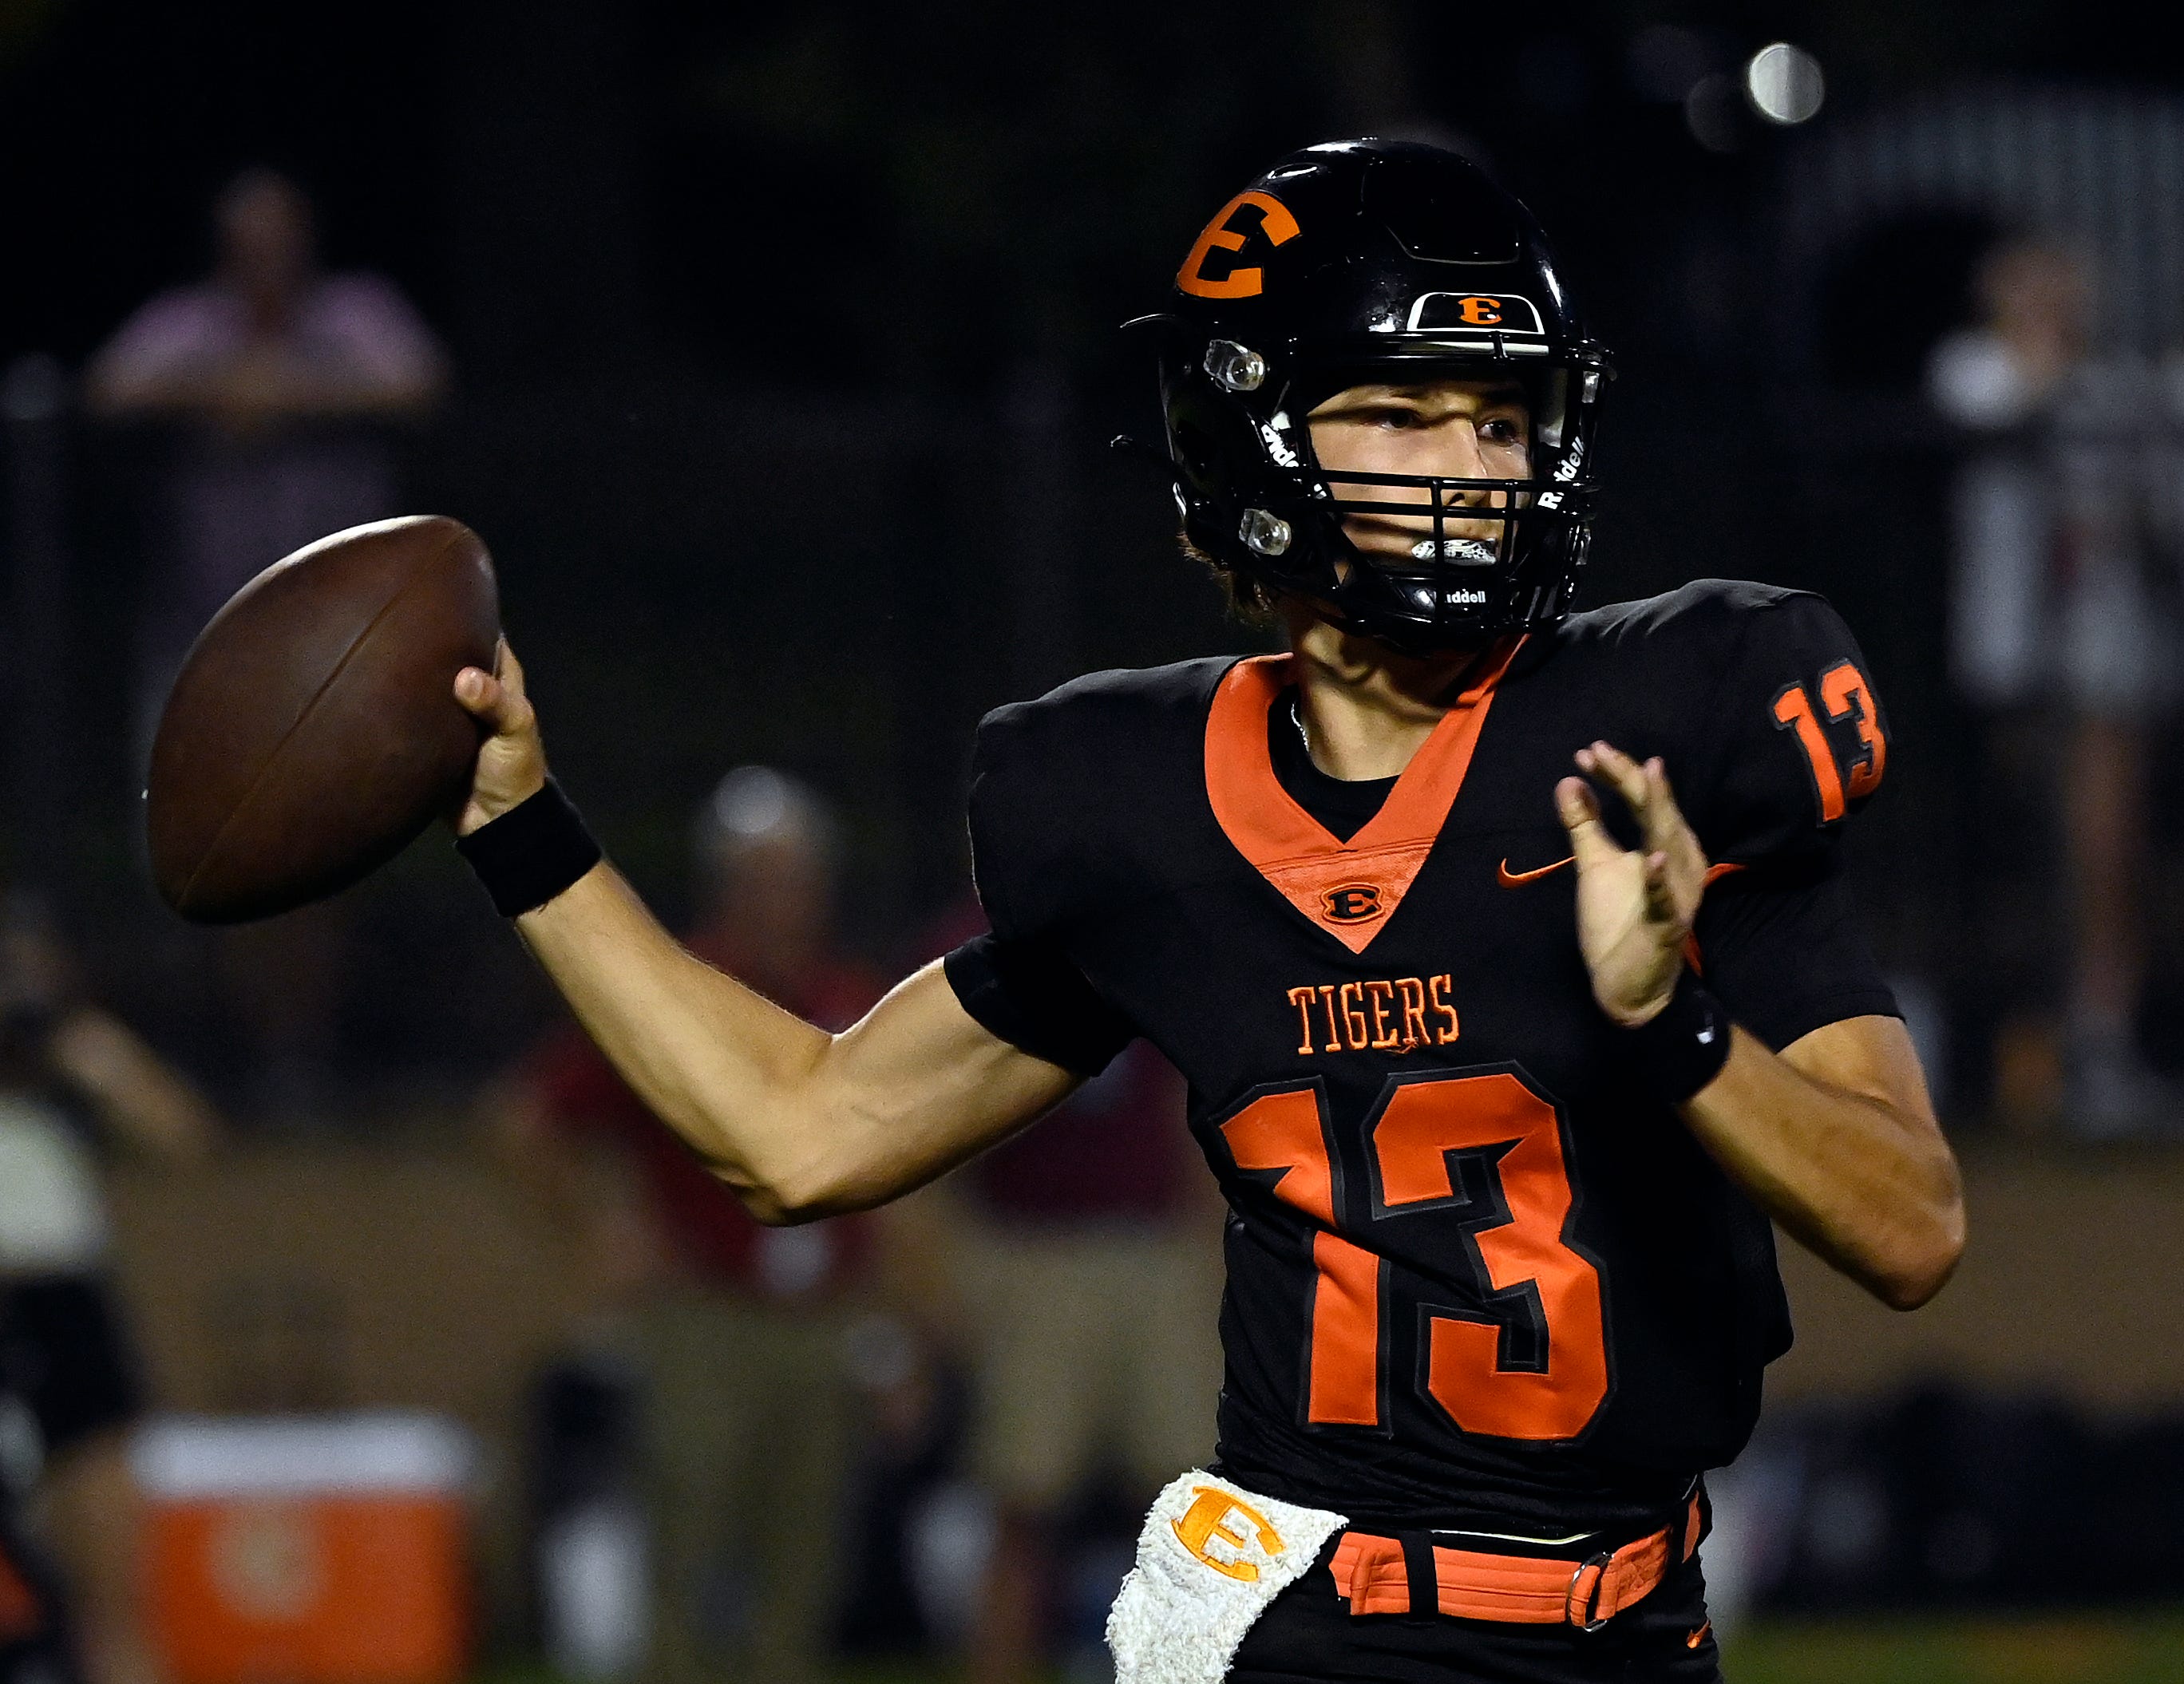 Ensworth’s Max Holtzclaw shows why he’s ‘one of the best quarterbacks in the state’